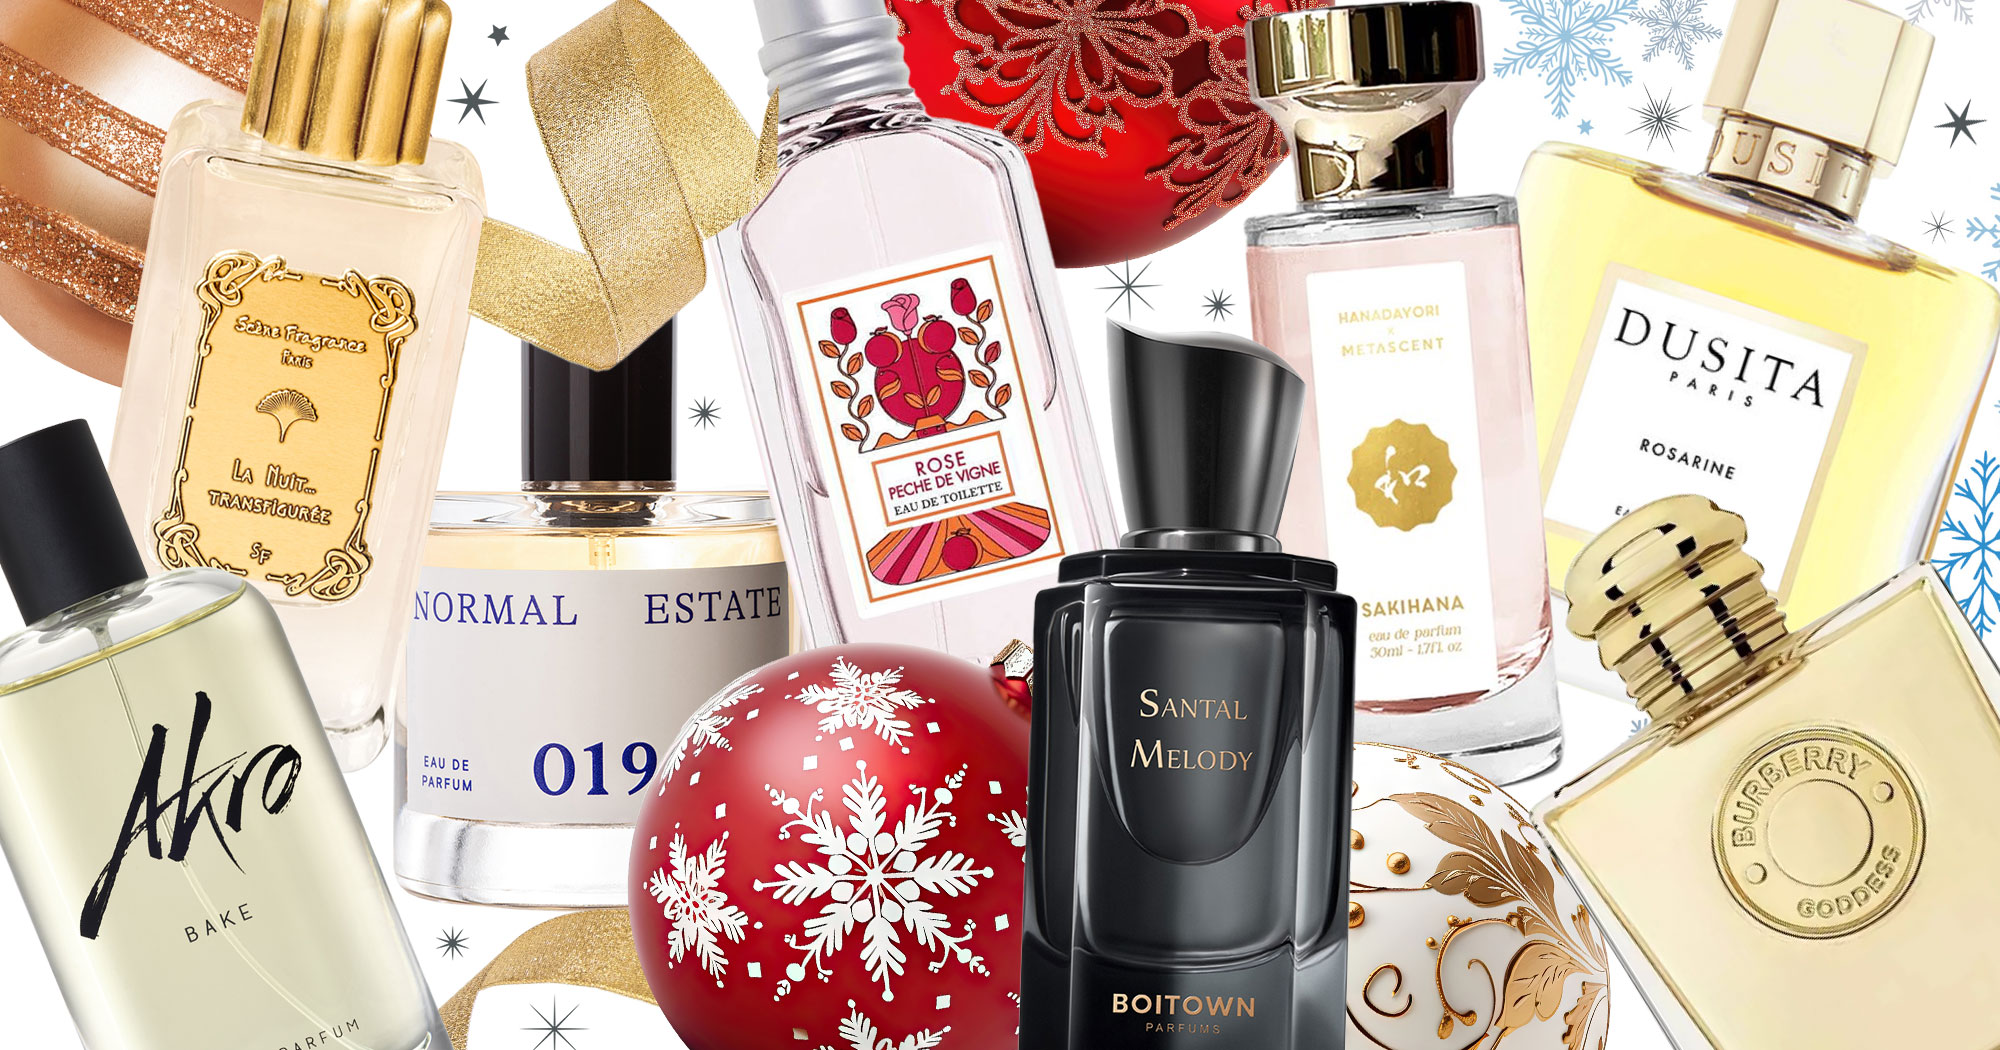 23 Best Perfumes for Women for 2018 – Top Selling Women's Perfumes